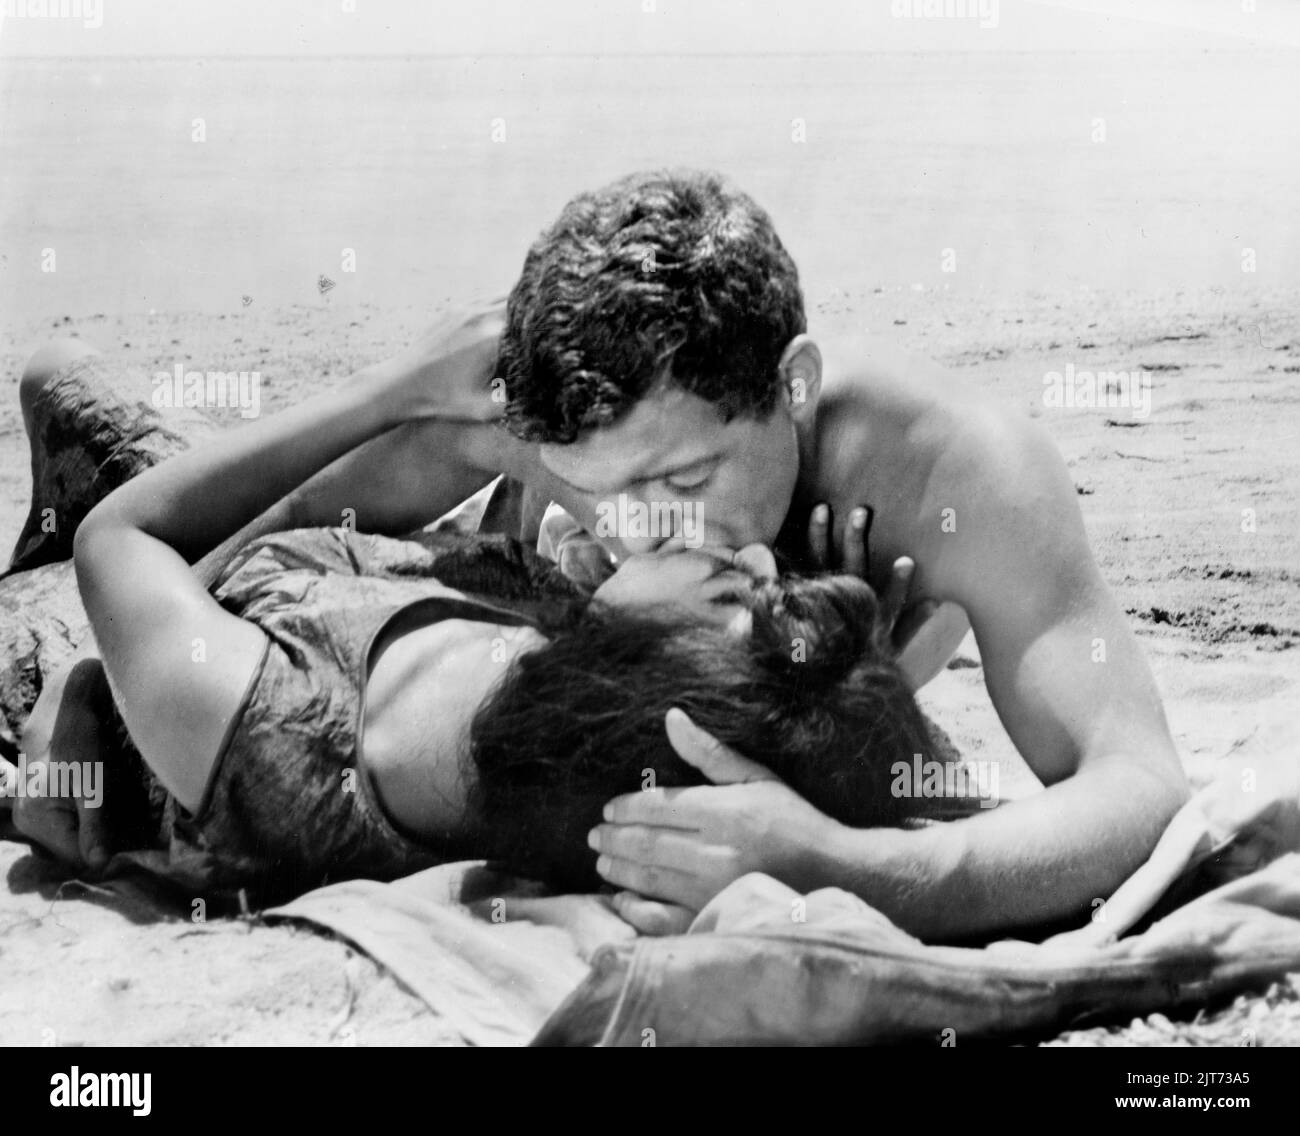 James MacArthur, Rita Moreno, on-set of the Film, 'Cry of Battle', Allied Artists, 1963 Stock Photo